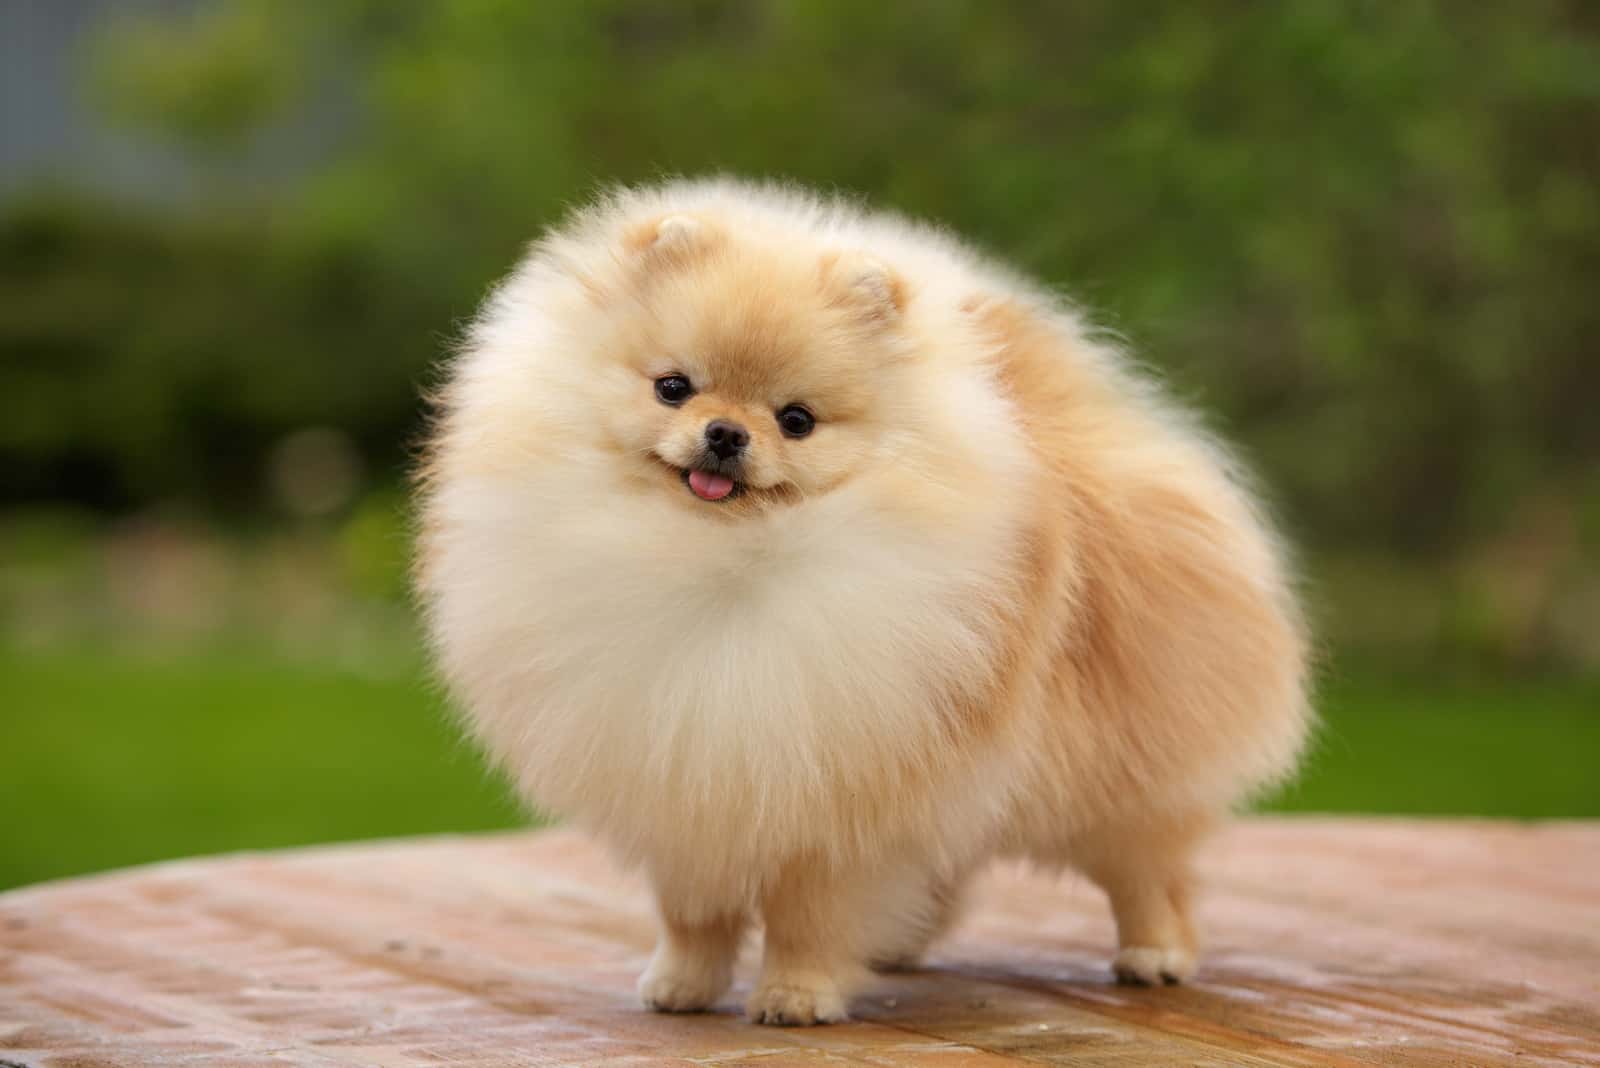 Pomeranian standing on table